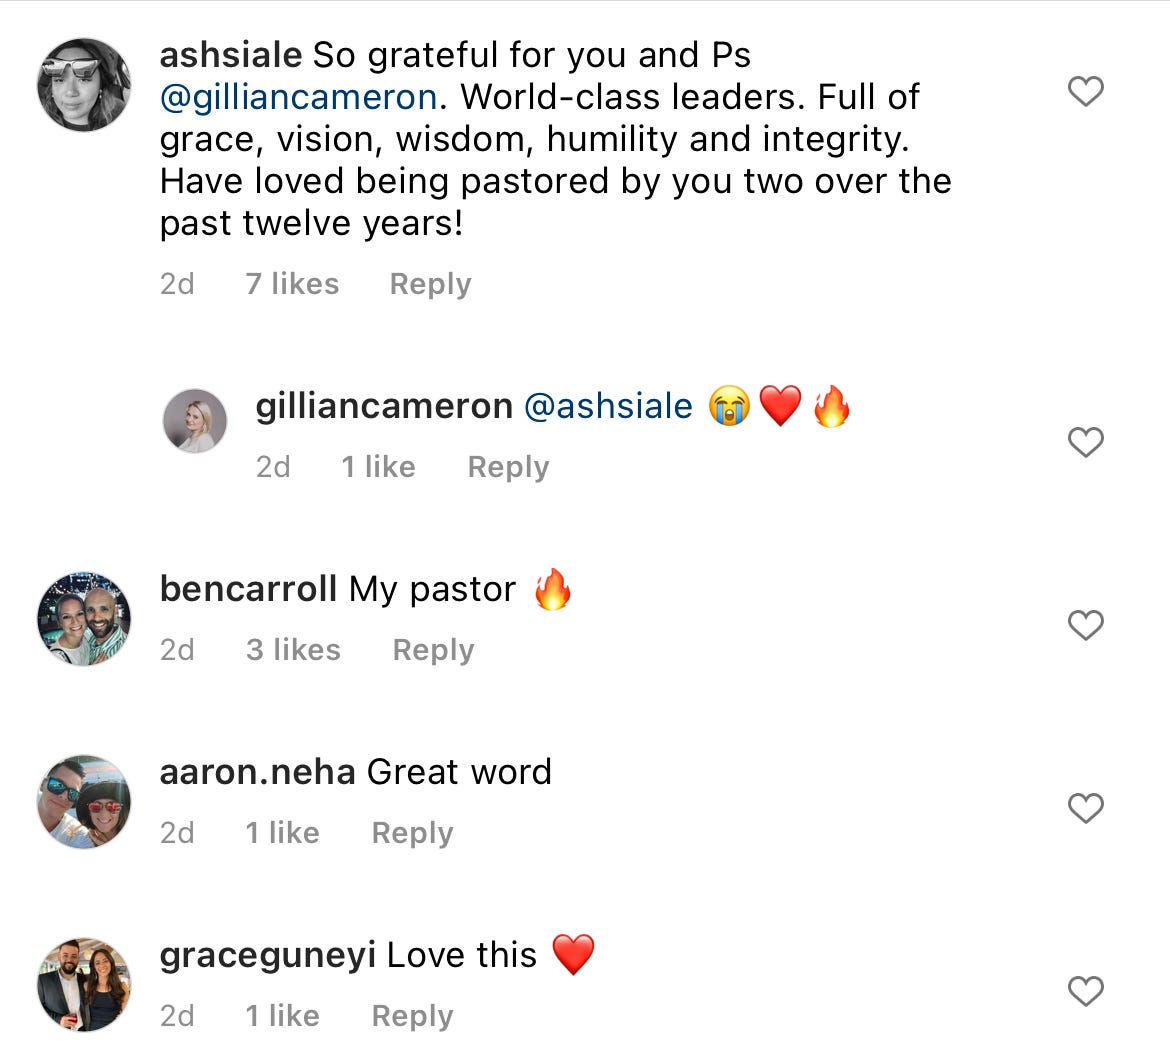 Praises pile in in the comments - then Gillian:A loudly crying face, followed by a red heart, capped off with the classic heart on fire emoji.